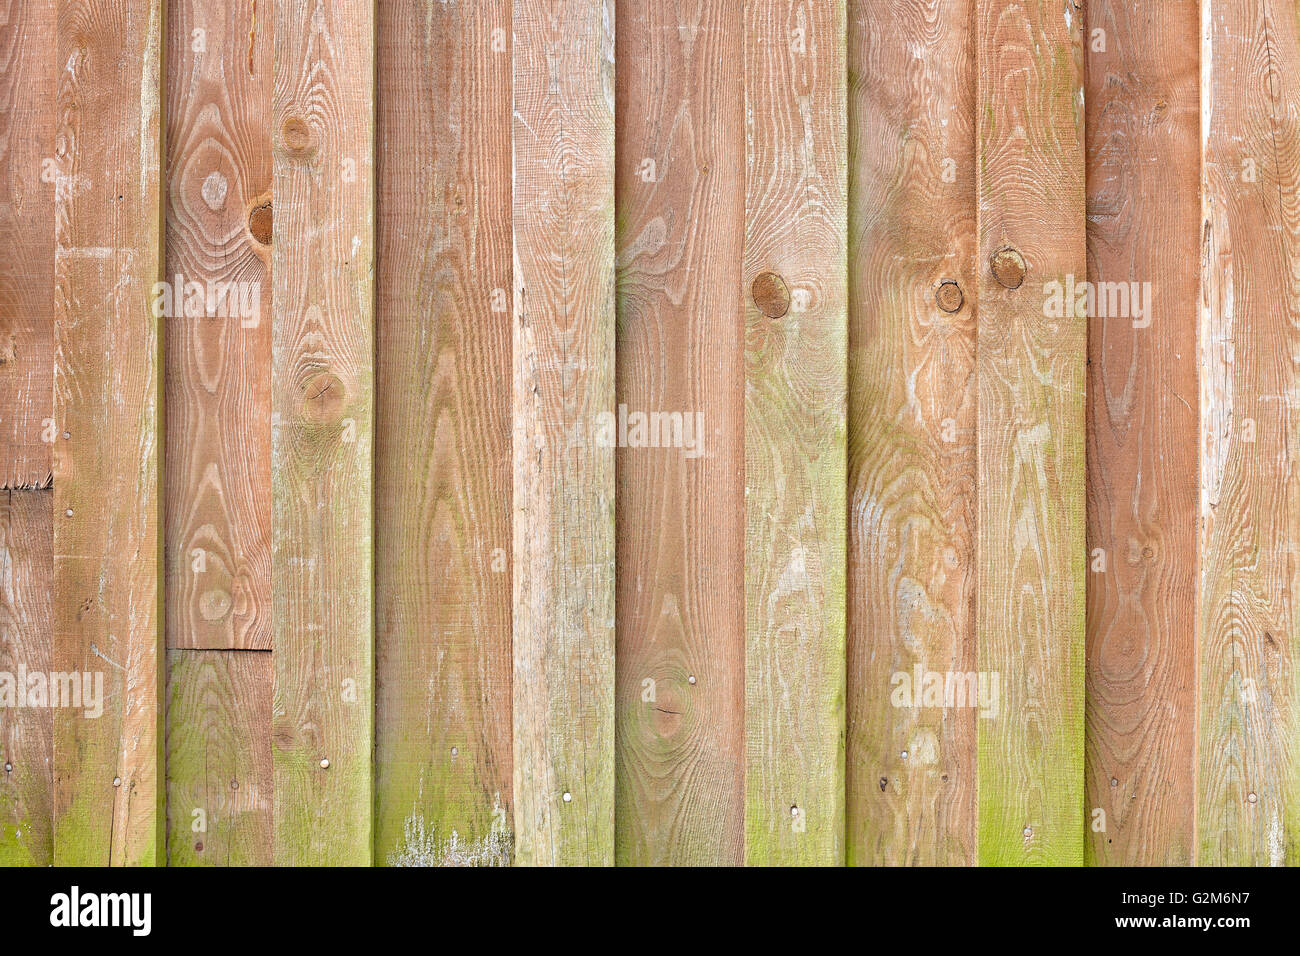 Background made of weathered wooden boards. Stock Photo